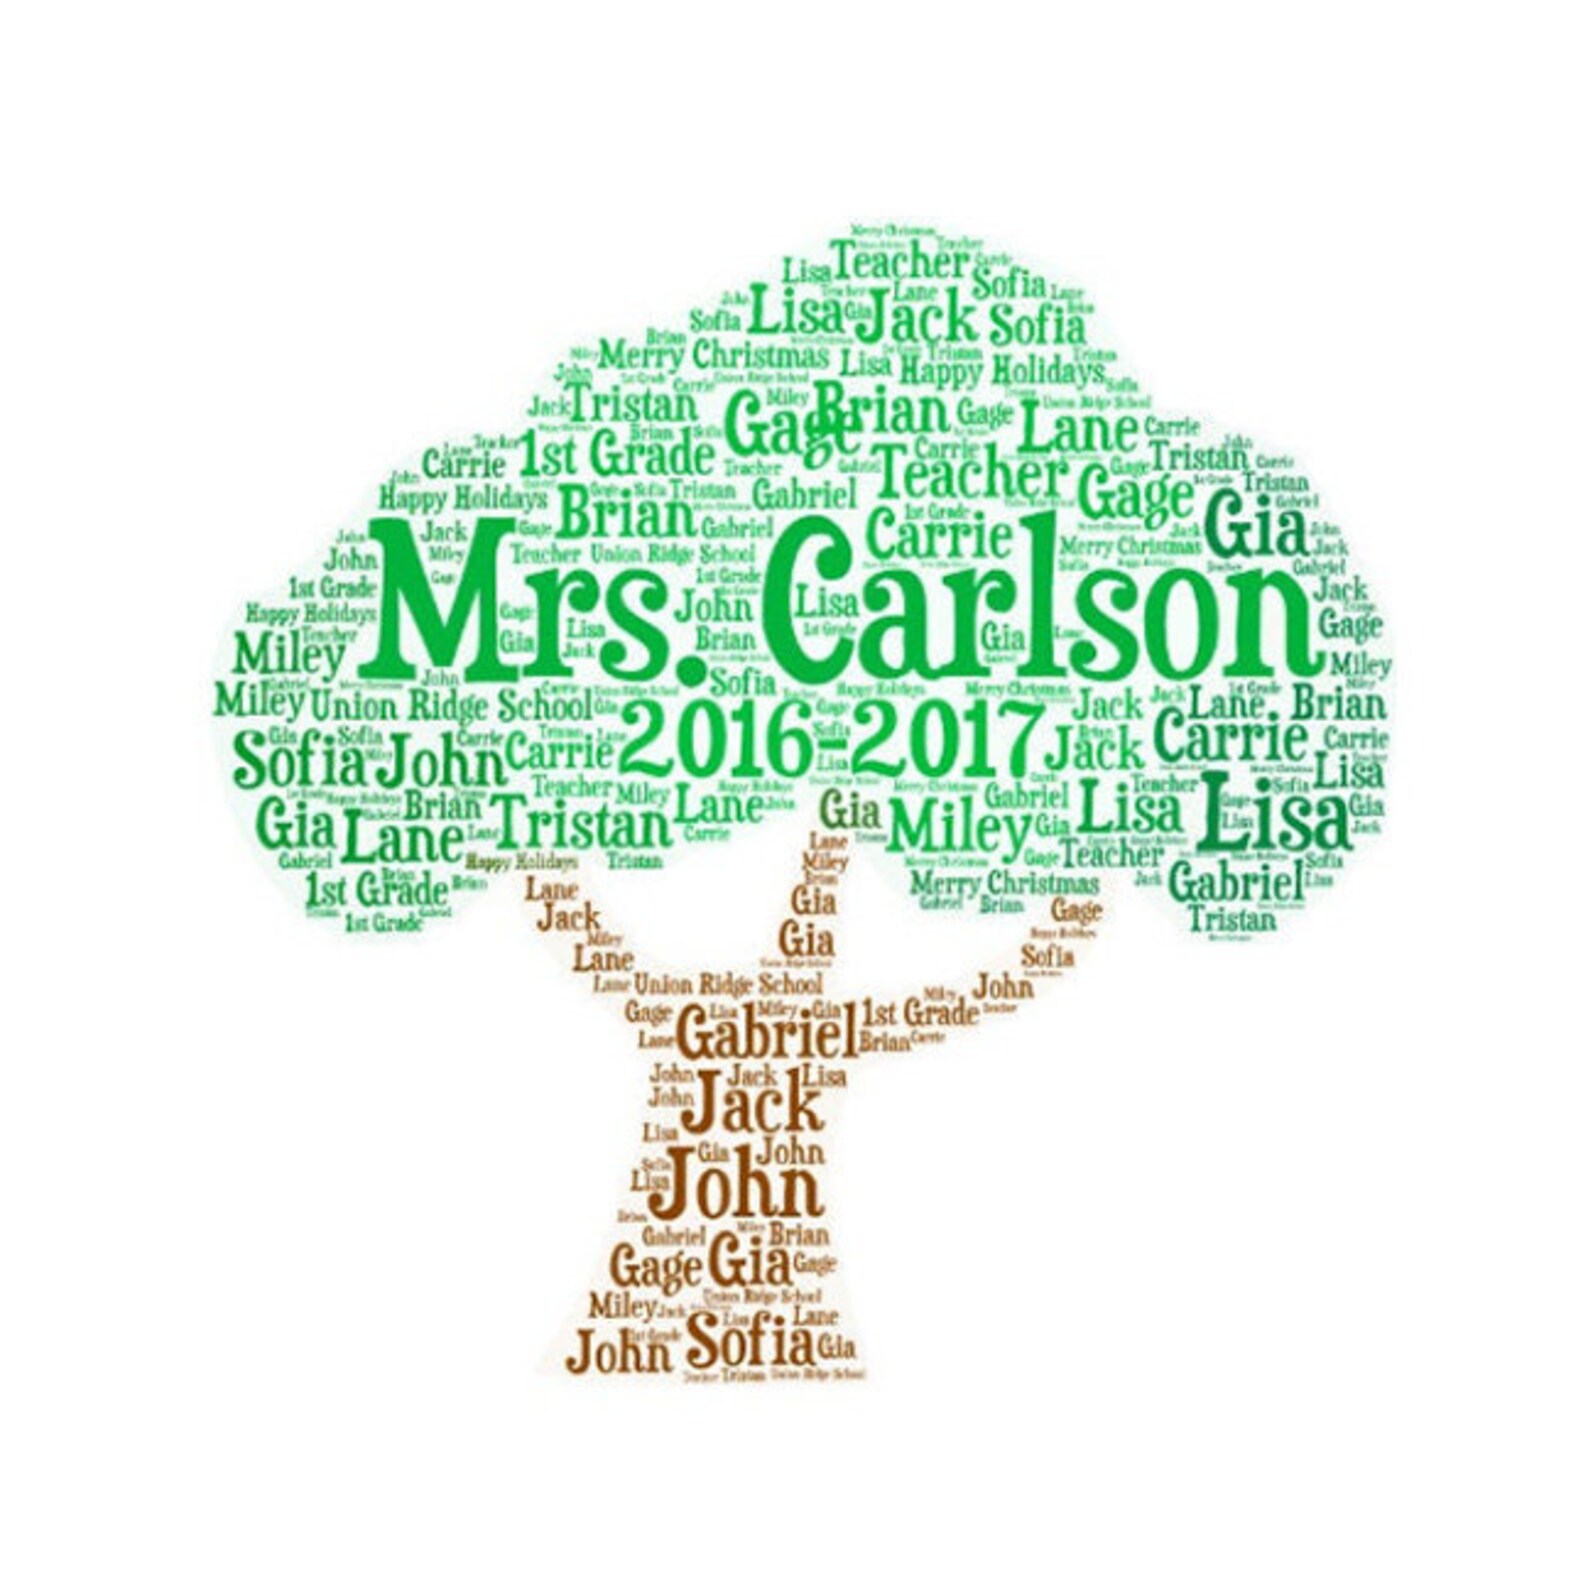 Tree words. Concept of self compassion. Kindness in Leadership. Authenticity, and Wisdom.. Self compassion presentation Canva.